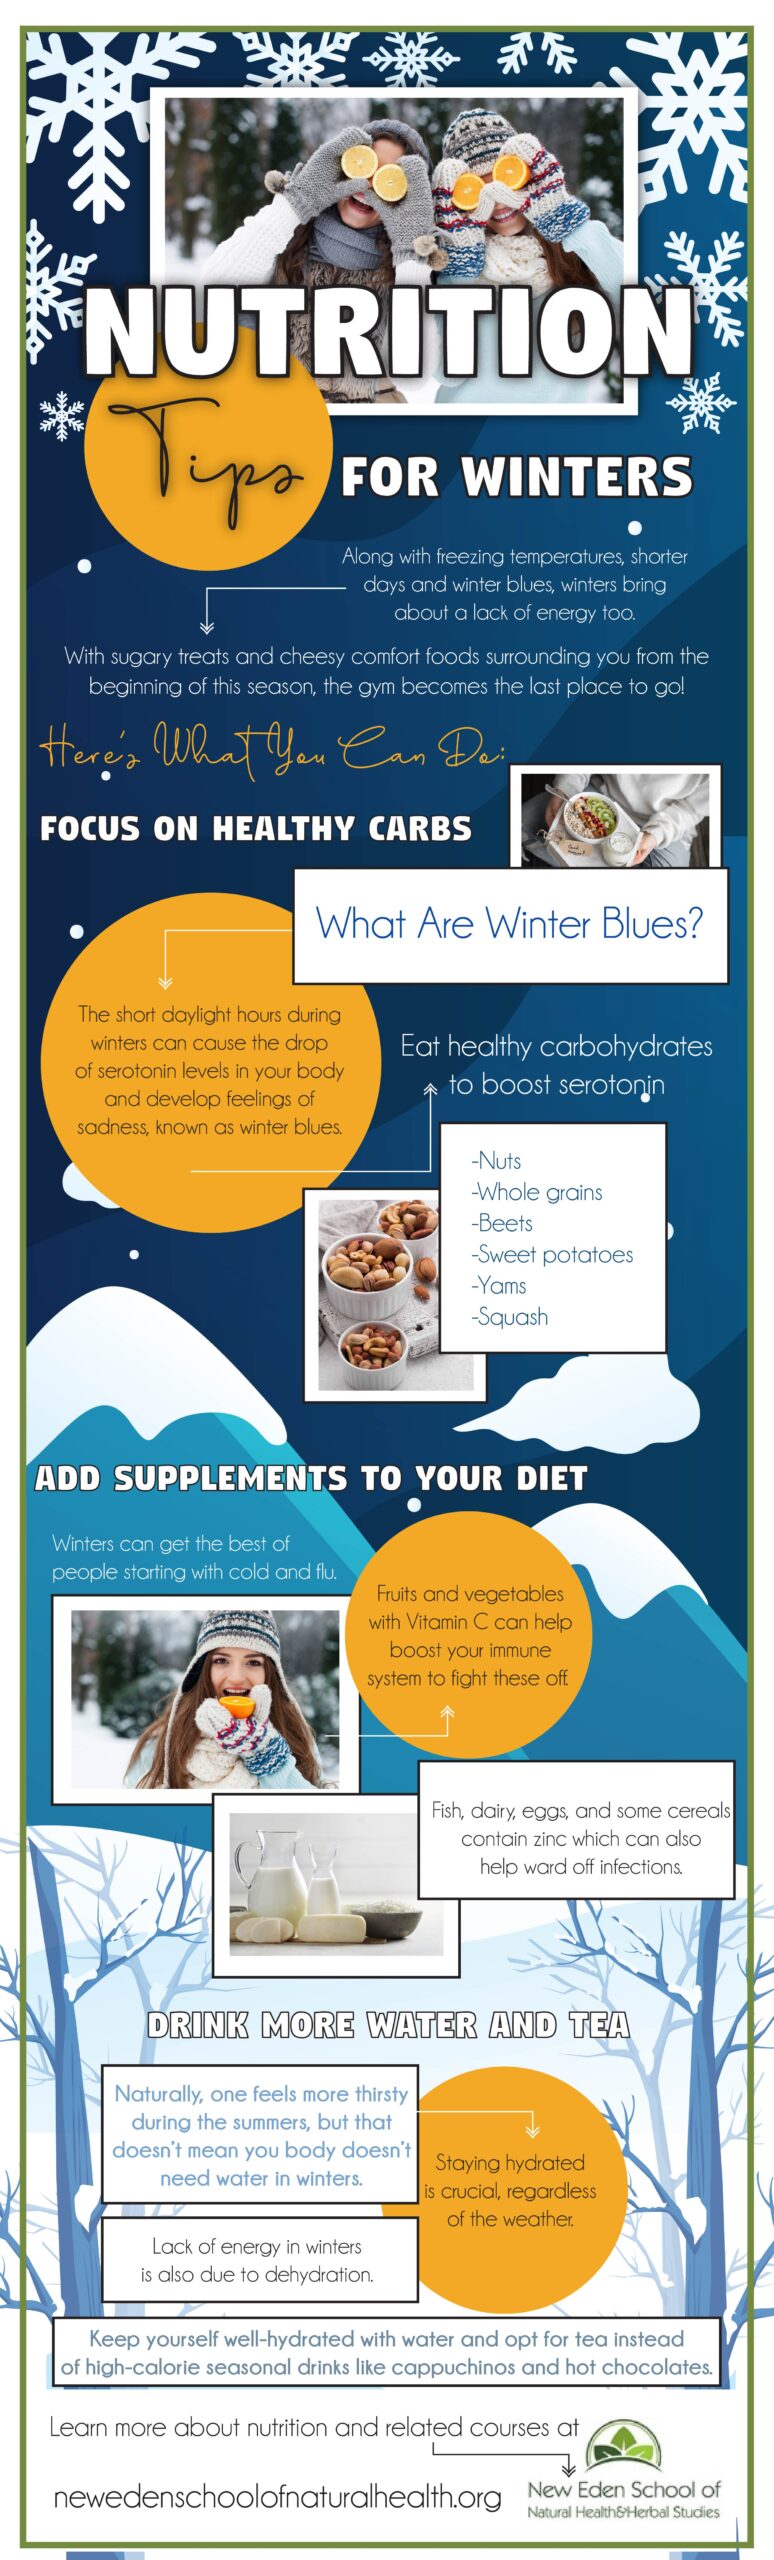 Nutrition Tips For Winters